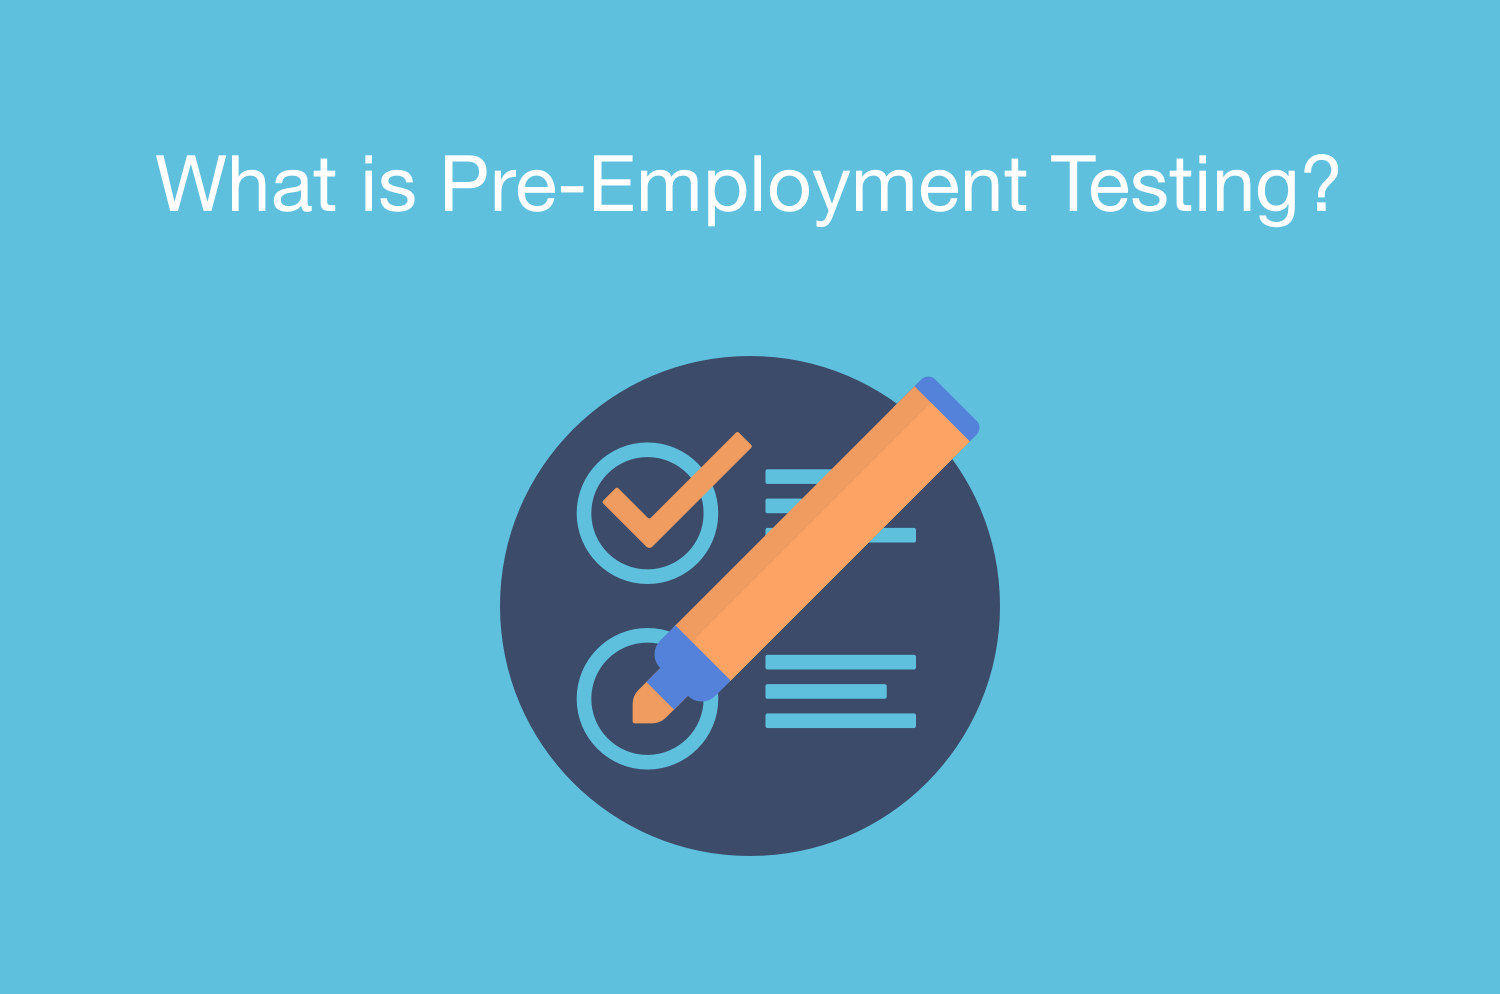 What is Pre-Employment Testing